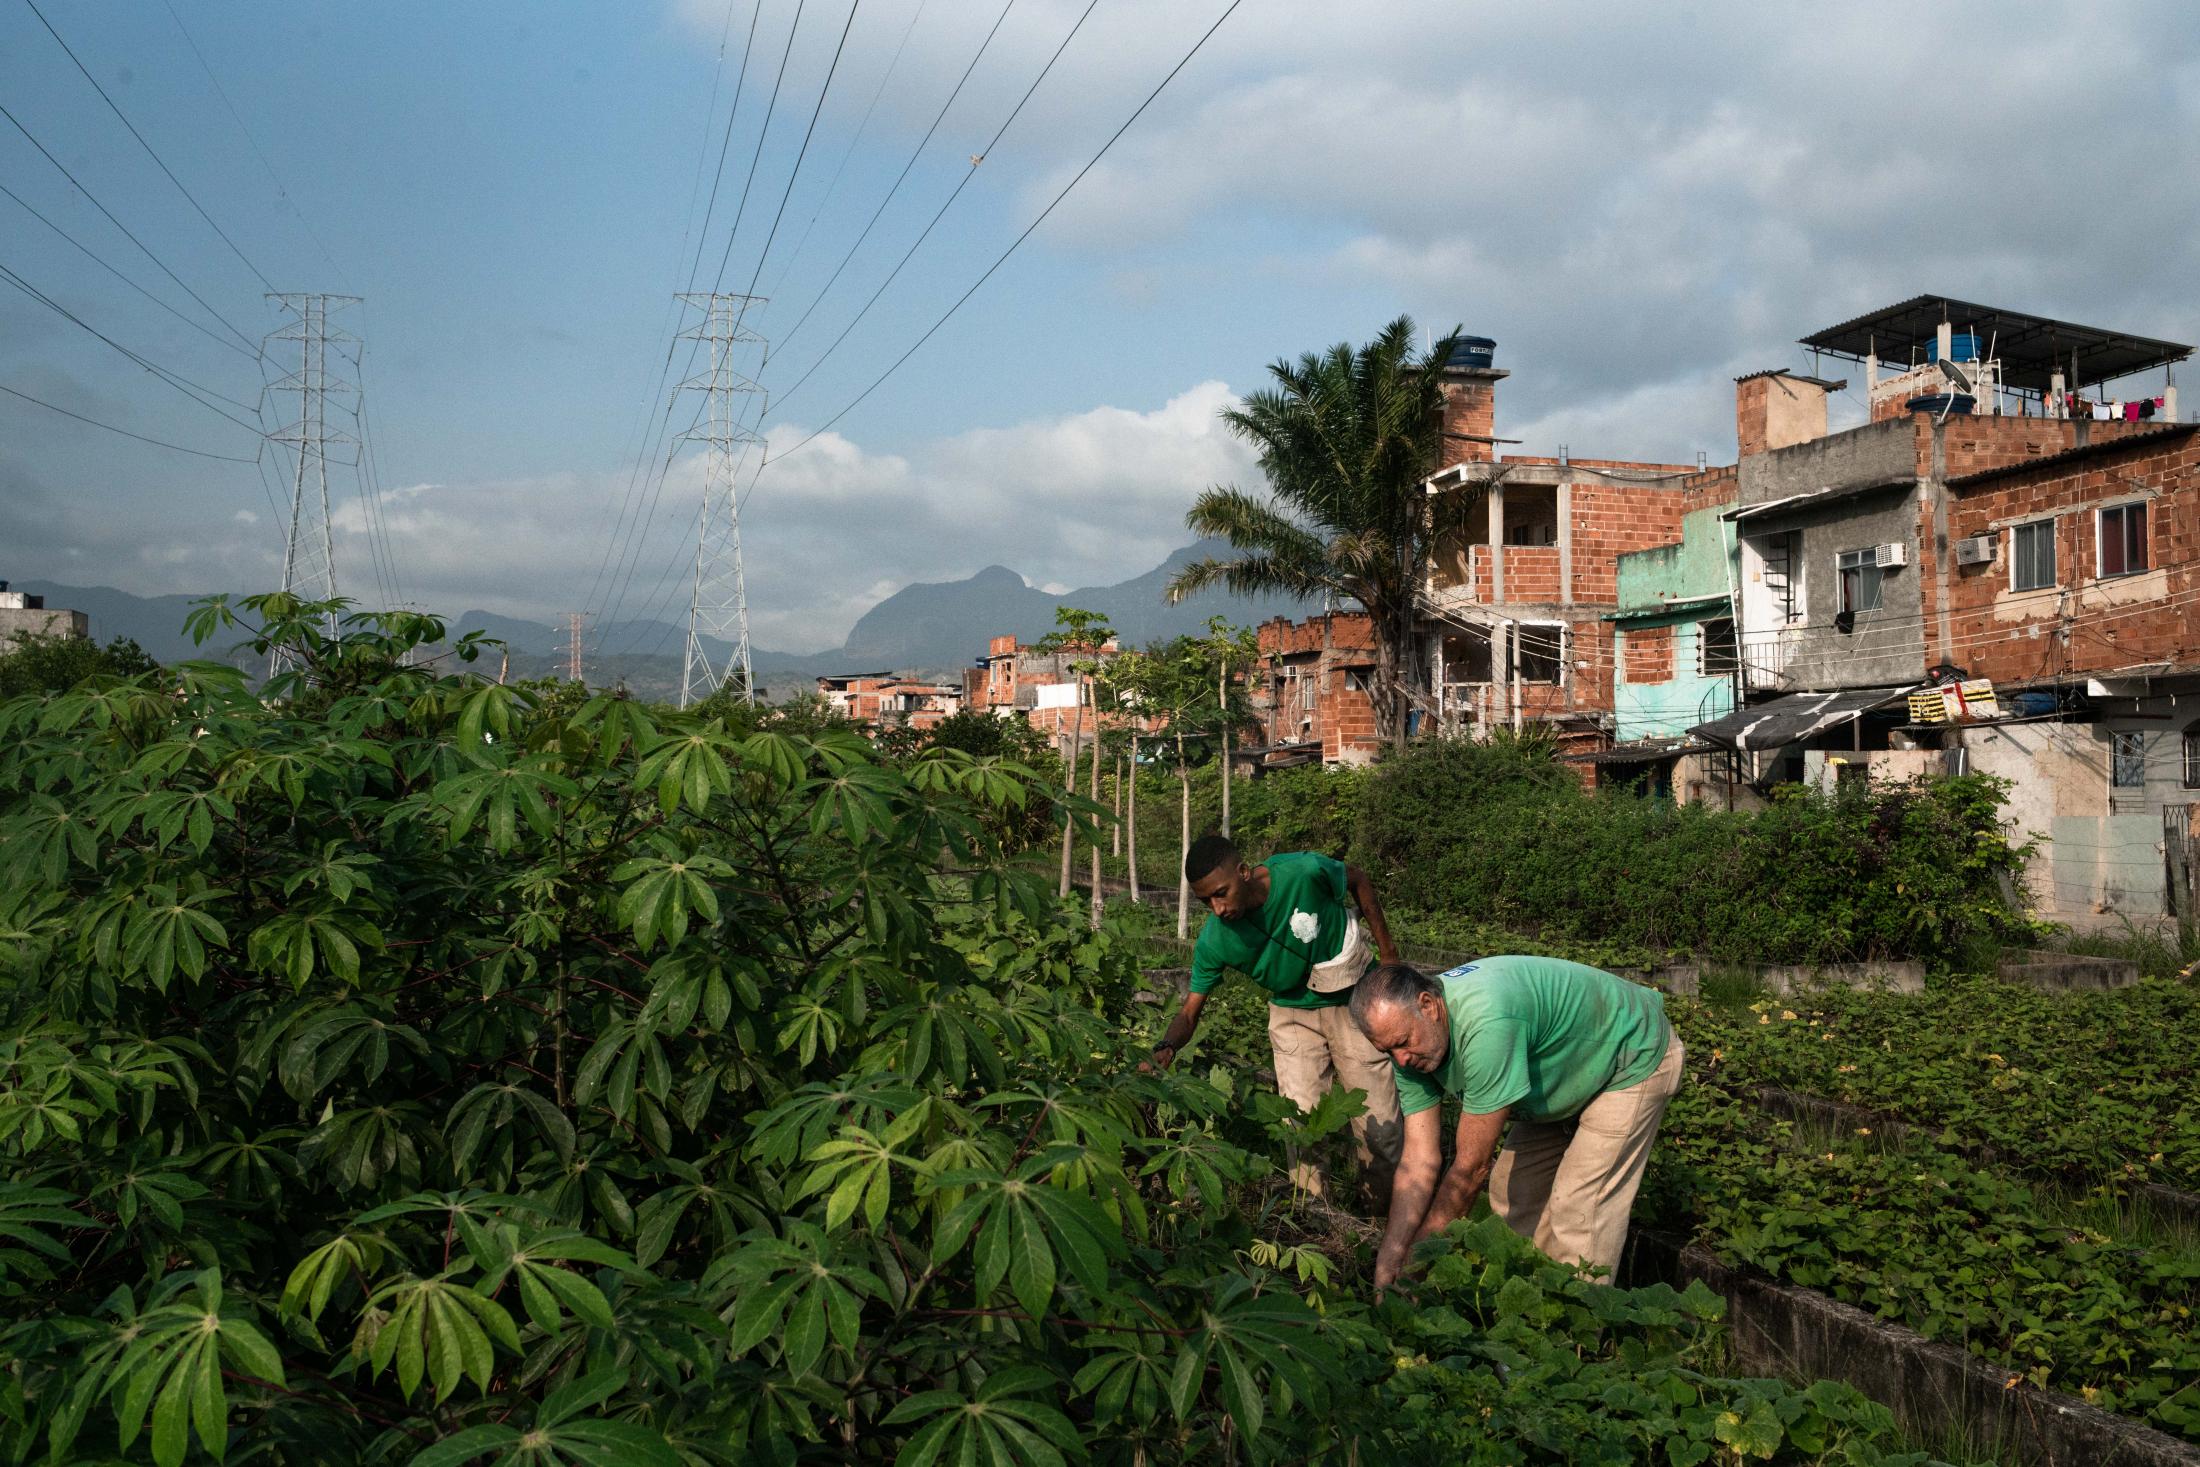 Urban farming in Brazil's favelas: this garden saves lives - Workers from the Manguinhos&rsquo; Urban farm plant new vegetables that are going to be...